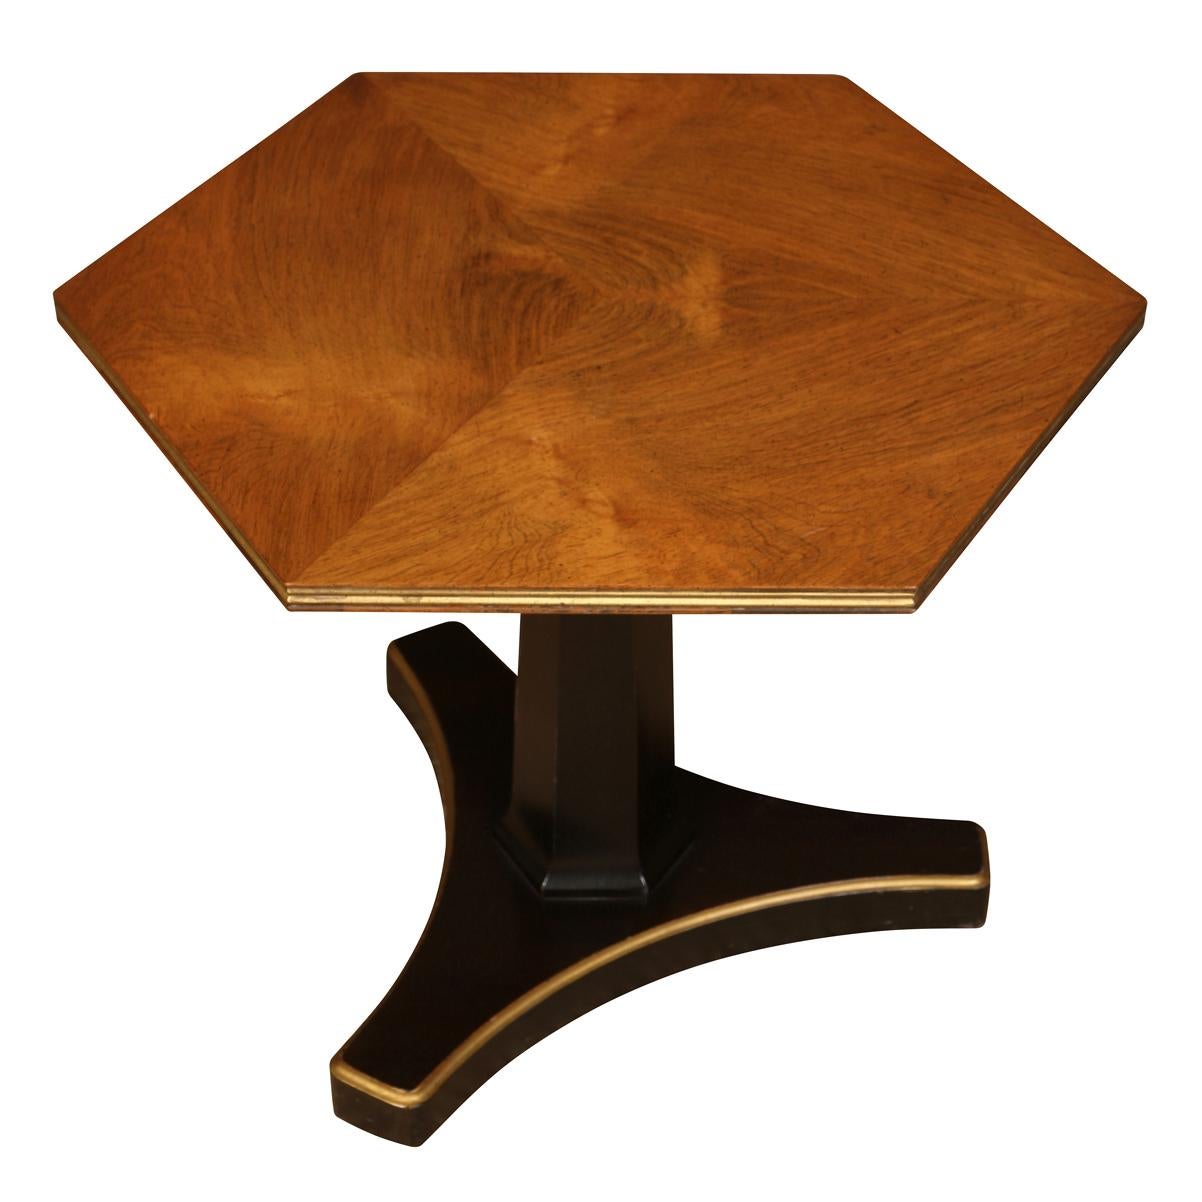 Pair of Petite Hexagonal Regency Ebonized Side Tables with Walnut Tops In Good Condition For Sale In Locust Valley, NY